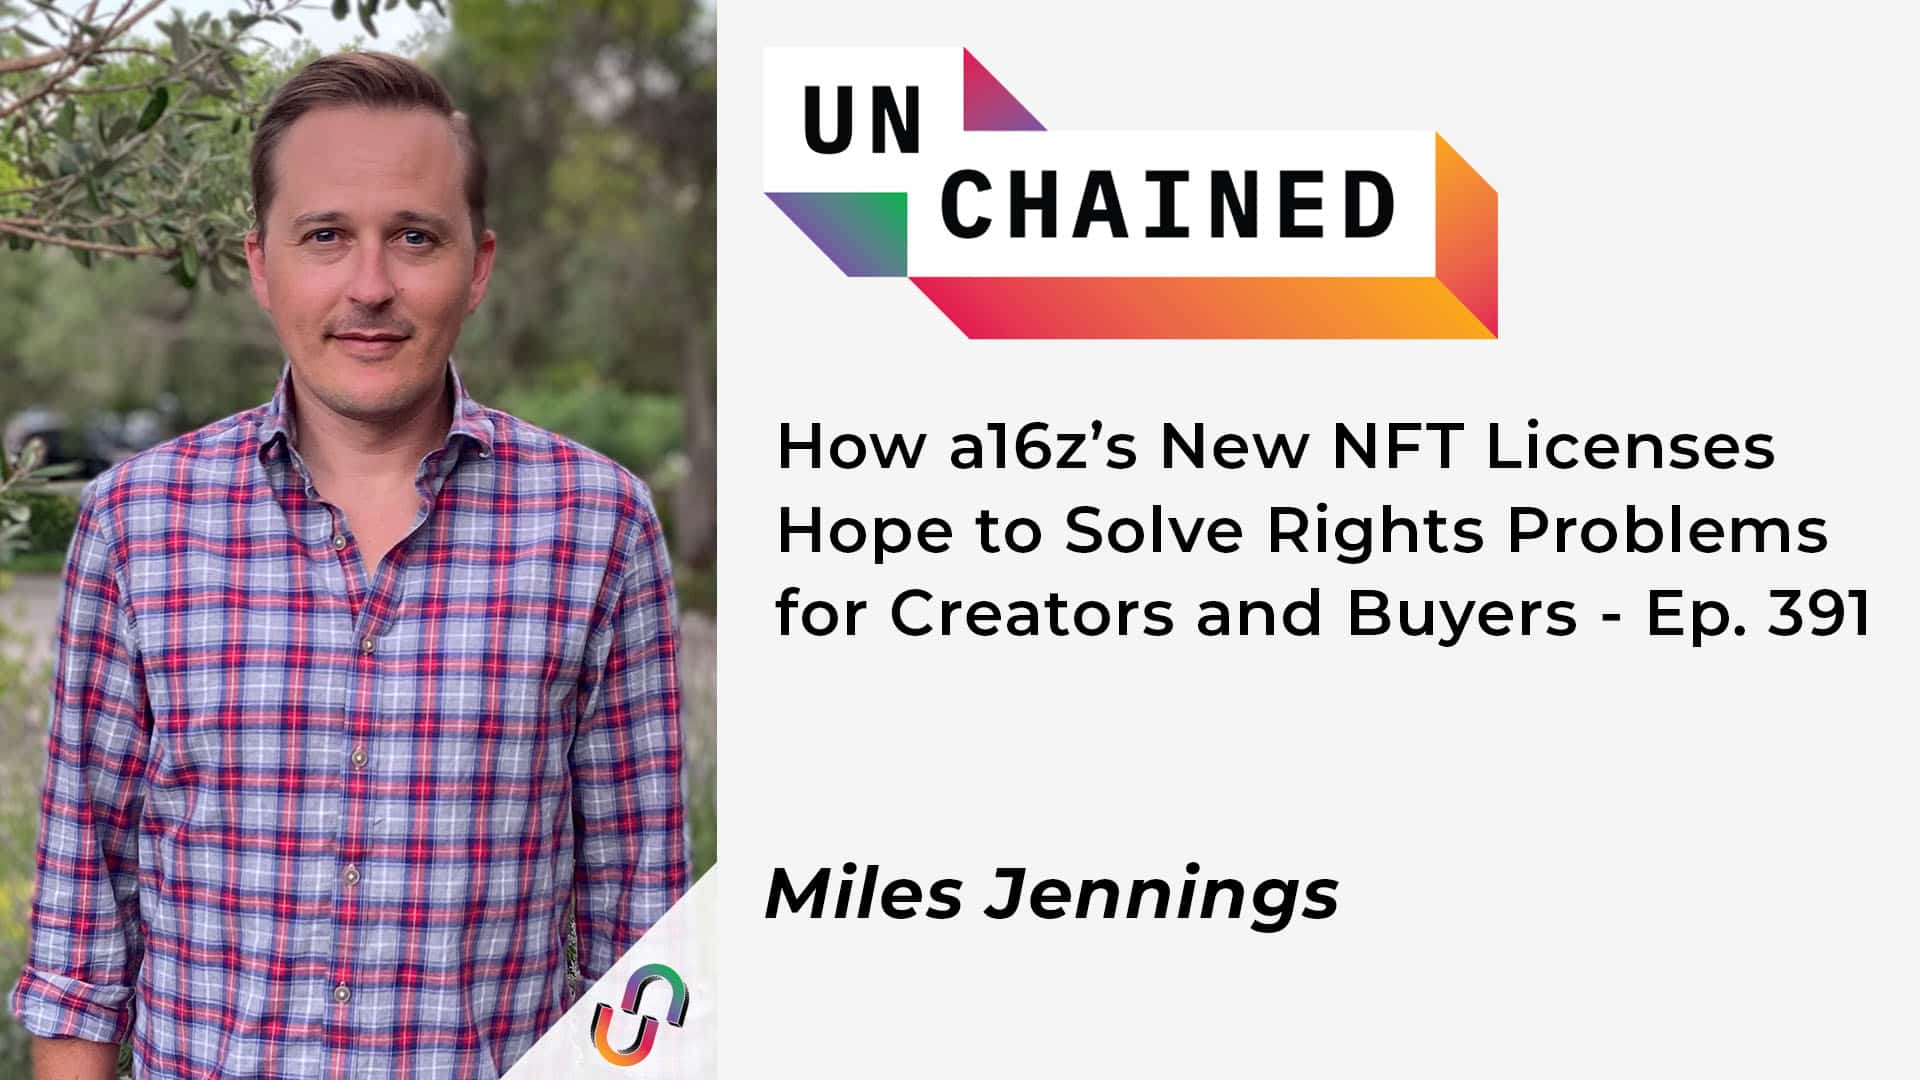 How a16z’s New NFT Licenses Hope to Solve Rights Problems for Creators and Buyers - Ep. 391